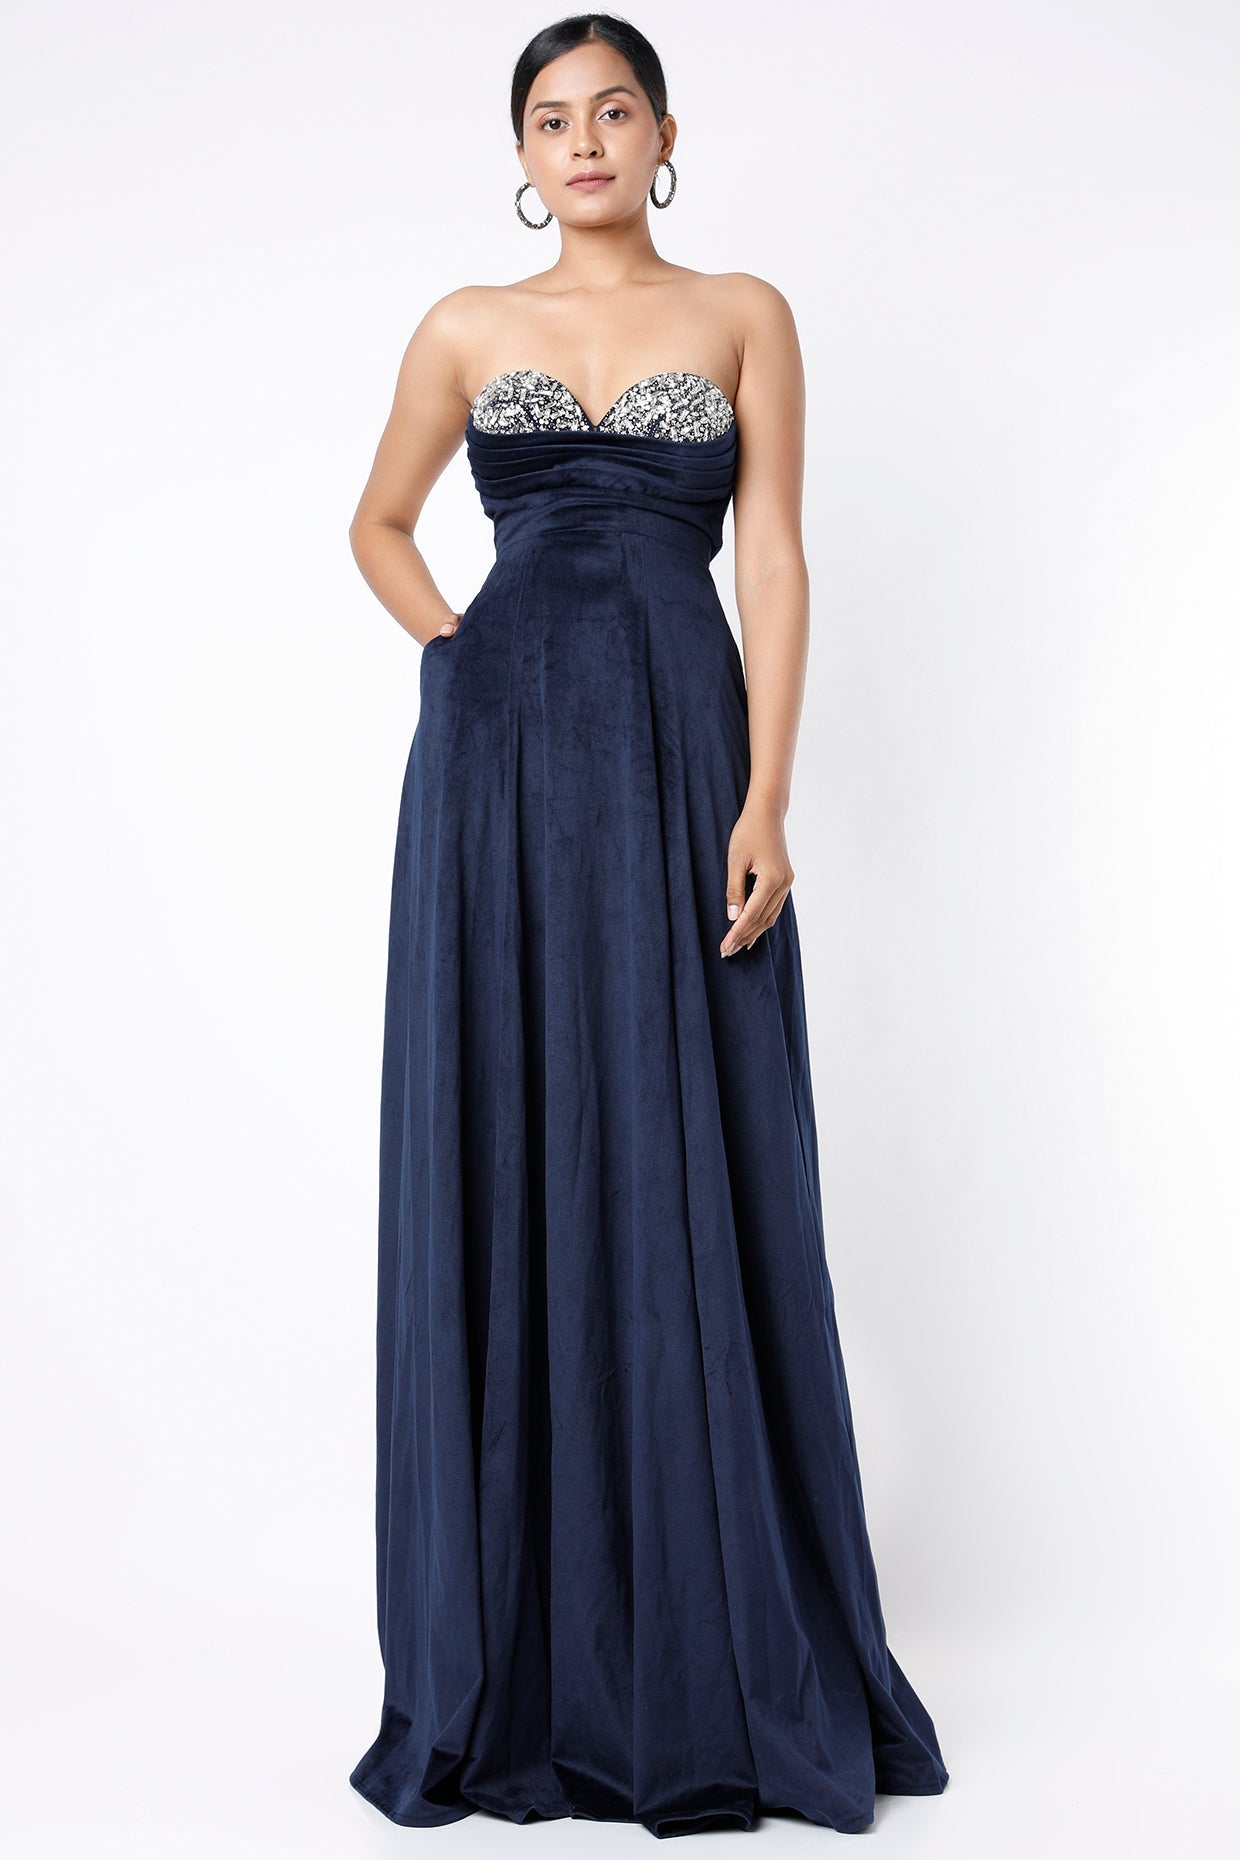 NAVY BLUE GOWN